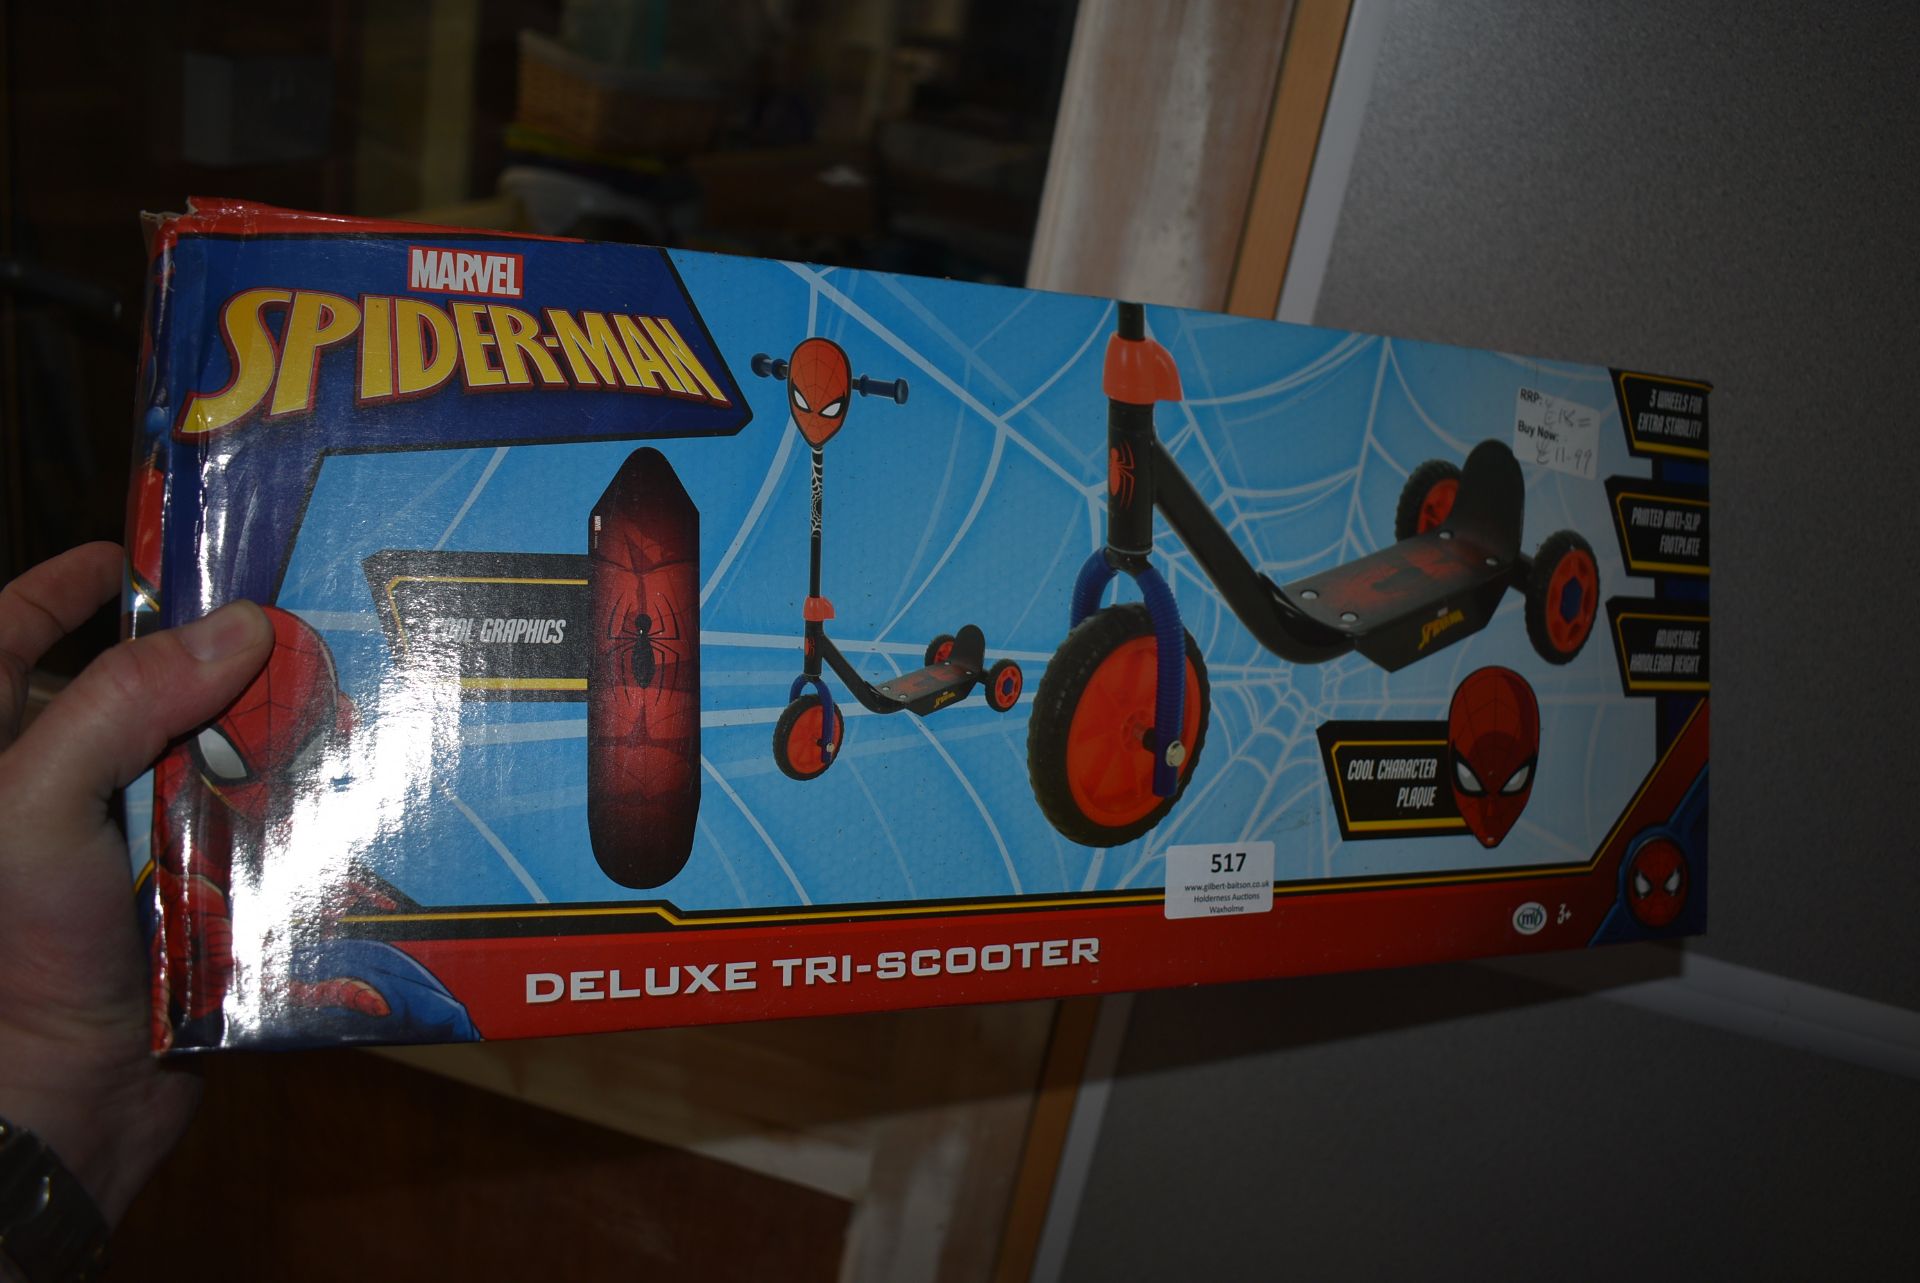 Spiderman Tri-Scooter - Image 2 of 4